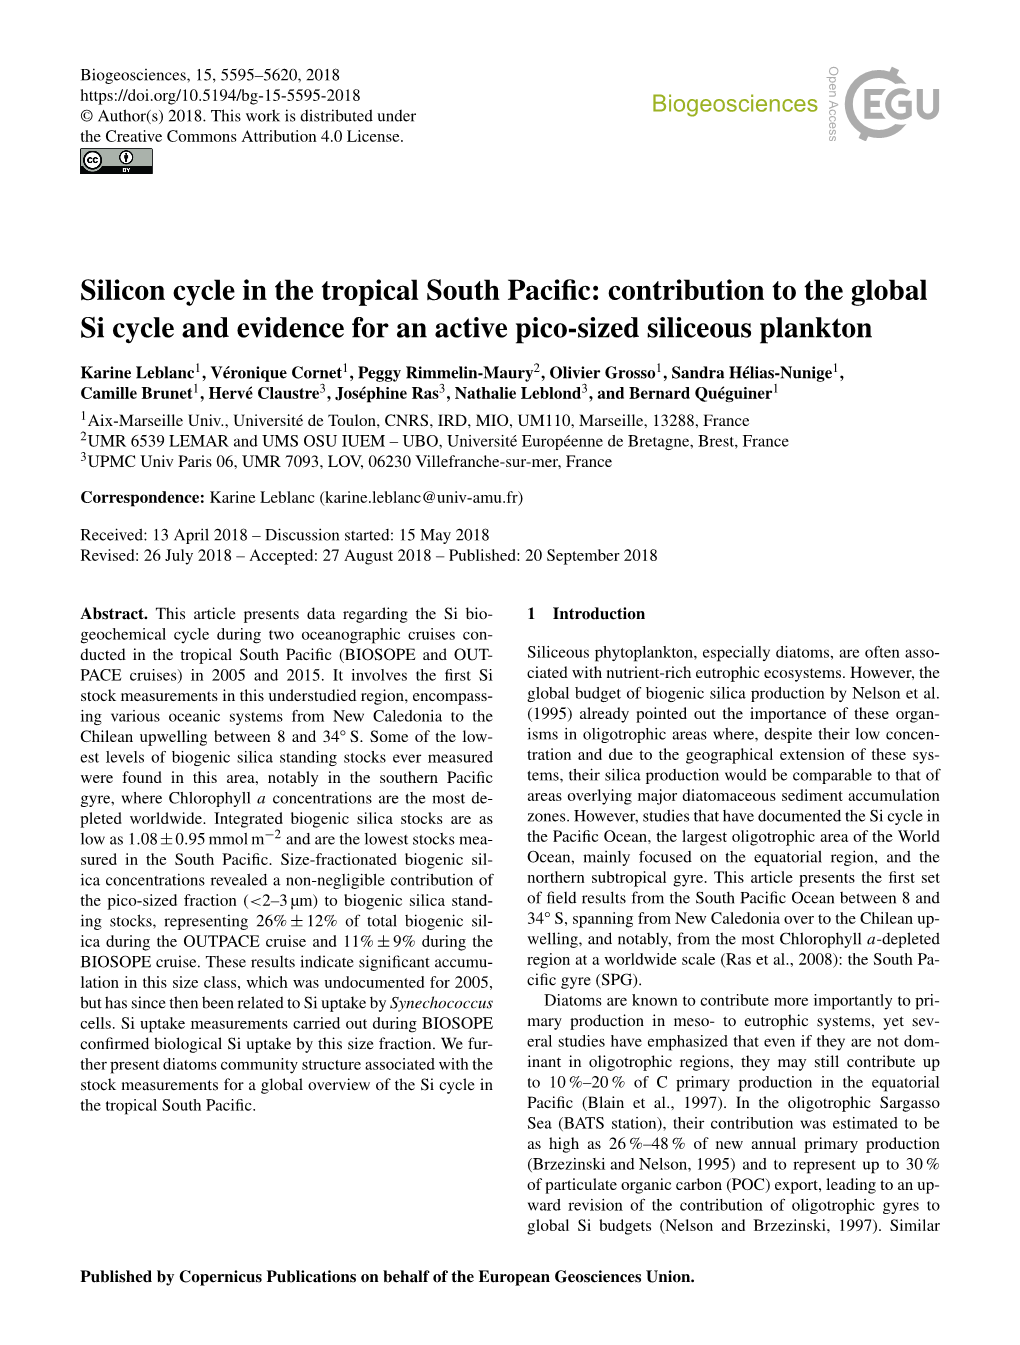 Silicon Cycle in the Tropical South Pacific: Contribution to the Global Si